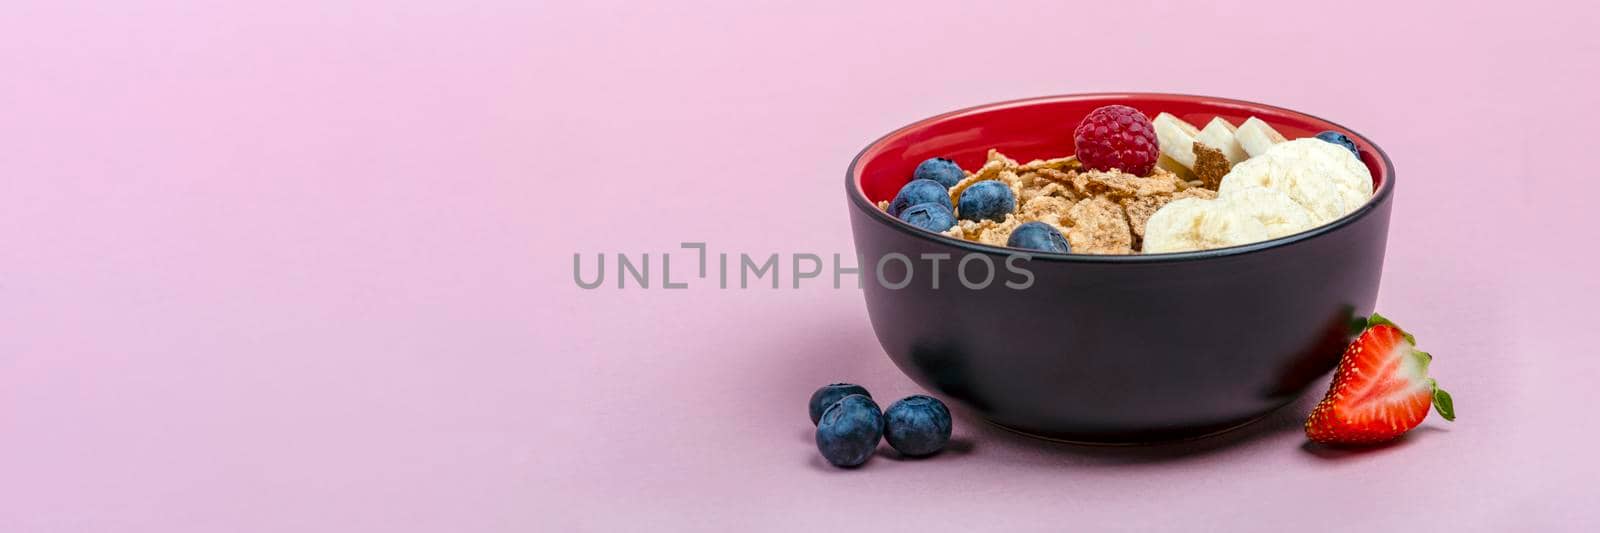 Muesli. Breakfast, healthy food and diet. Muesli with fruits in a plate on a pink background. Blueberries, strawberries and raspberries on a background of muesli flakes. Print banner with copy space by SERSOL